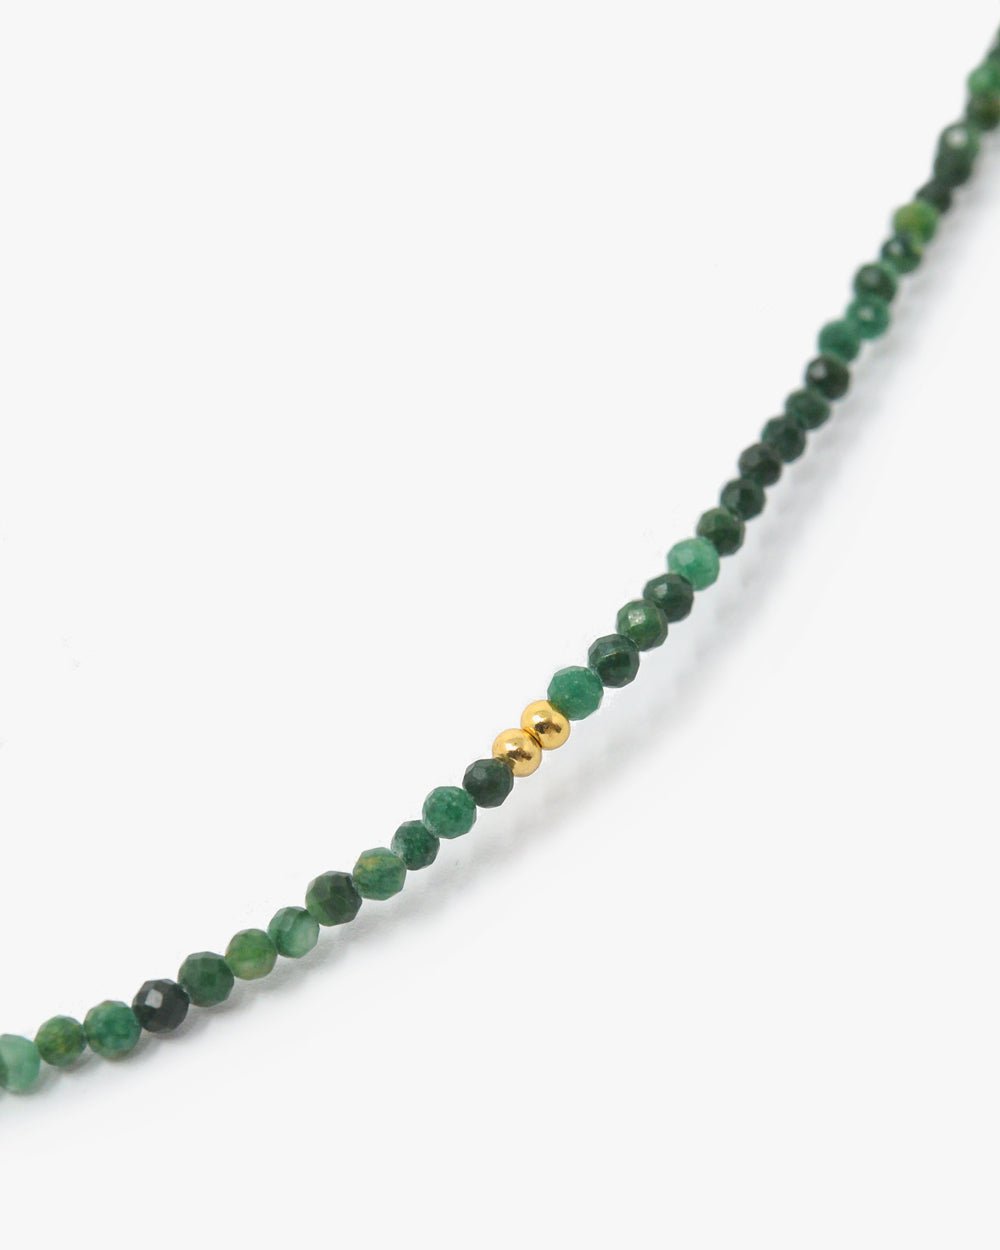 ALEX GREEN BEADED NECKLACE - Shop Cupcakes and Cashmere